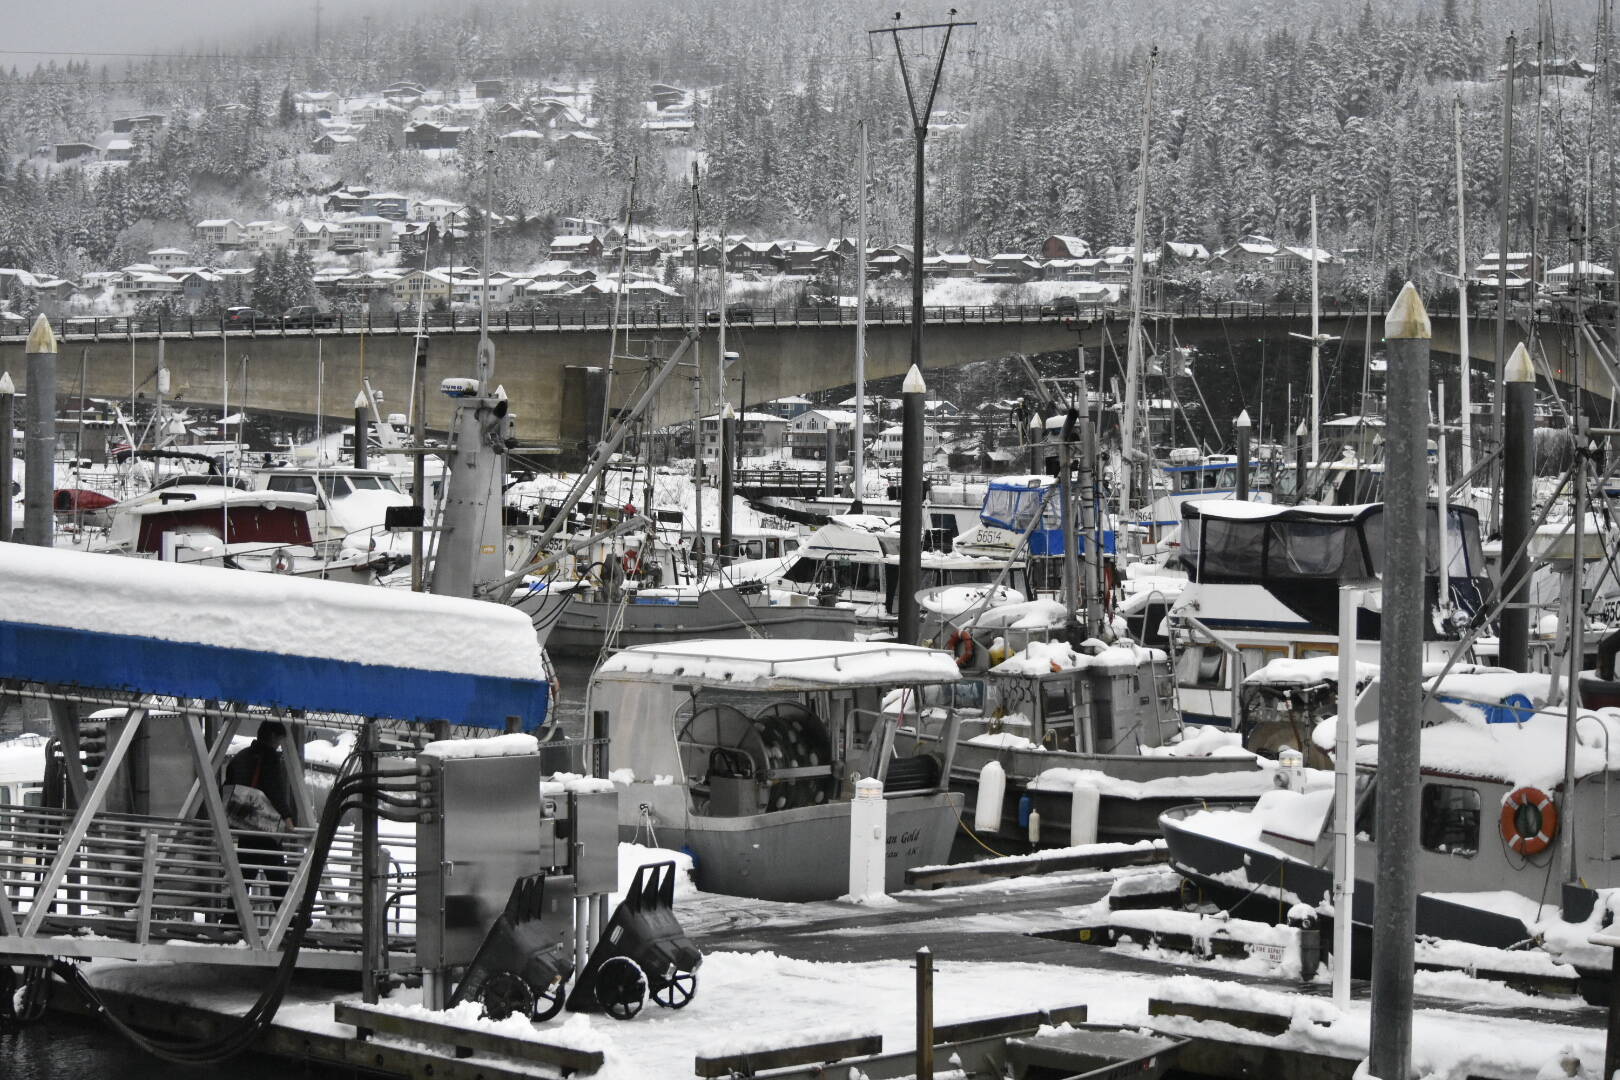 Heavy snow and rain fell on Juneau’s Aurora Harbor on Tuesday, Dec. 7, 2021, creating potentially hazardous conditions. City and Borough of Juneau Docks and Harbors officials asked boat owners to keep a careful eye on their vessels as heavy snow and rain is expected through the week. (Peter Segall / Juneau Empire)